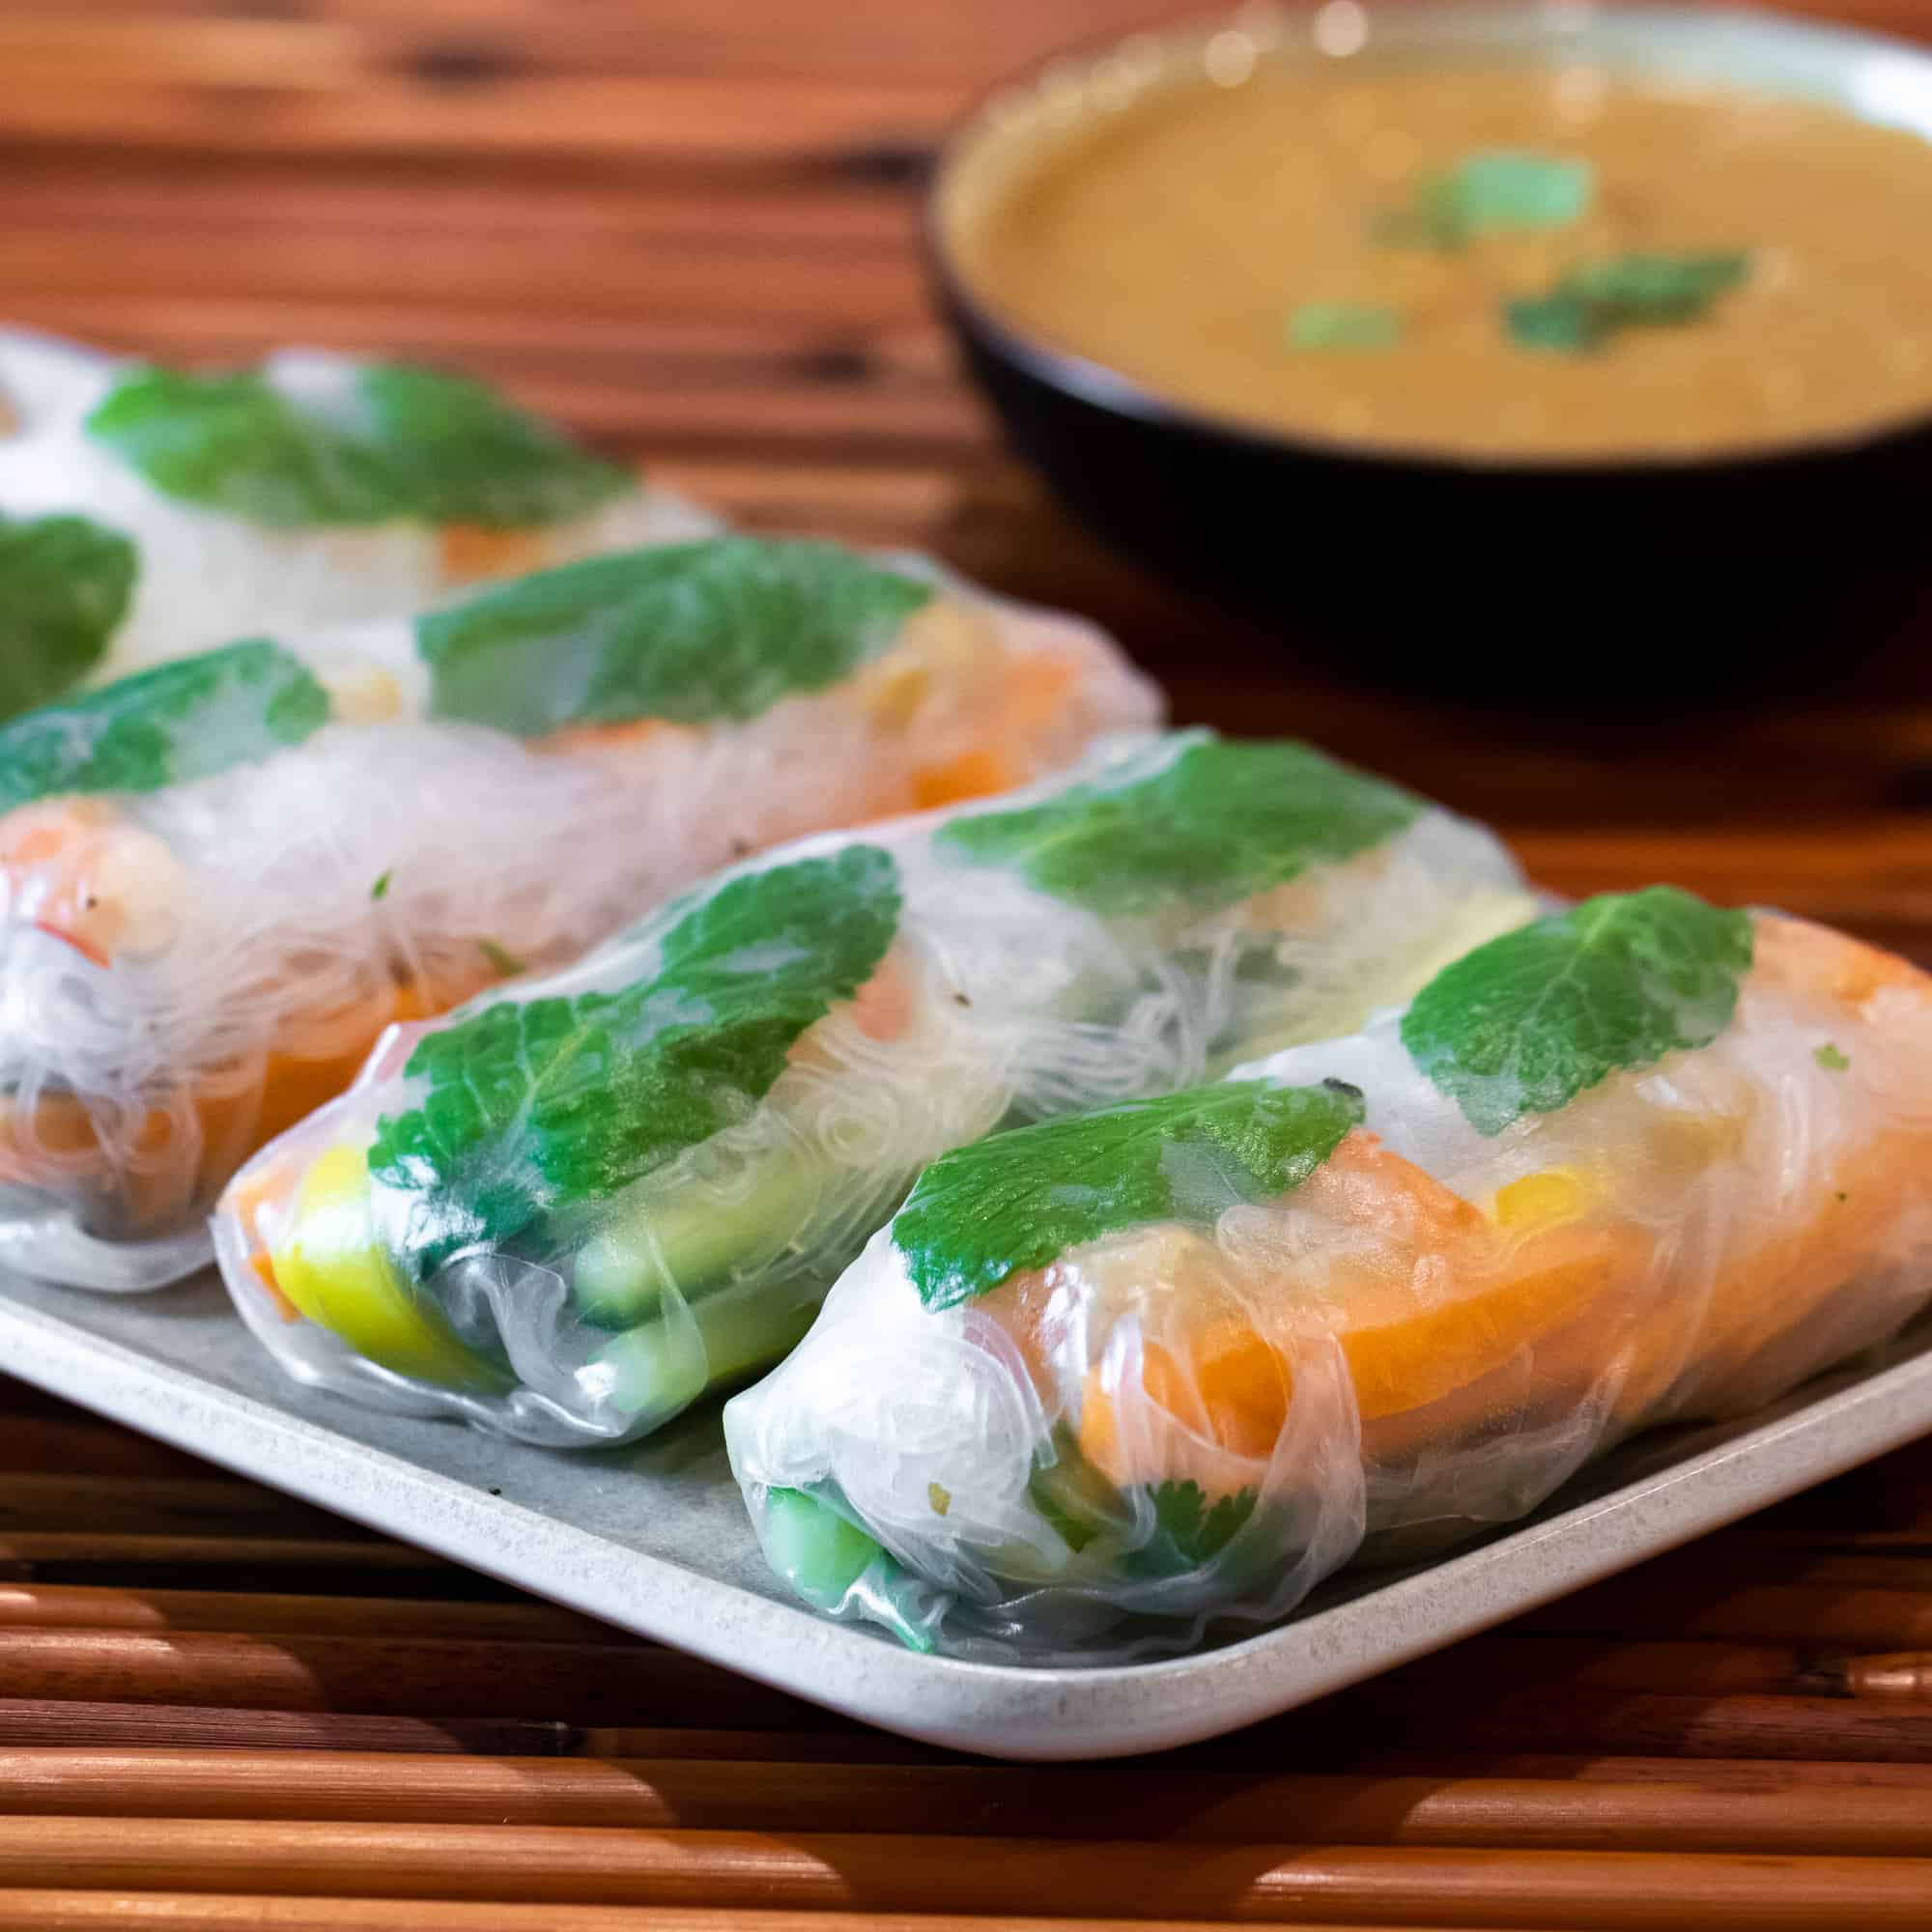 Mango Shrimp Spring Rolls With Brown Rice Wrappers - Healthy Thai Recipes